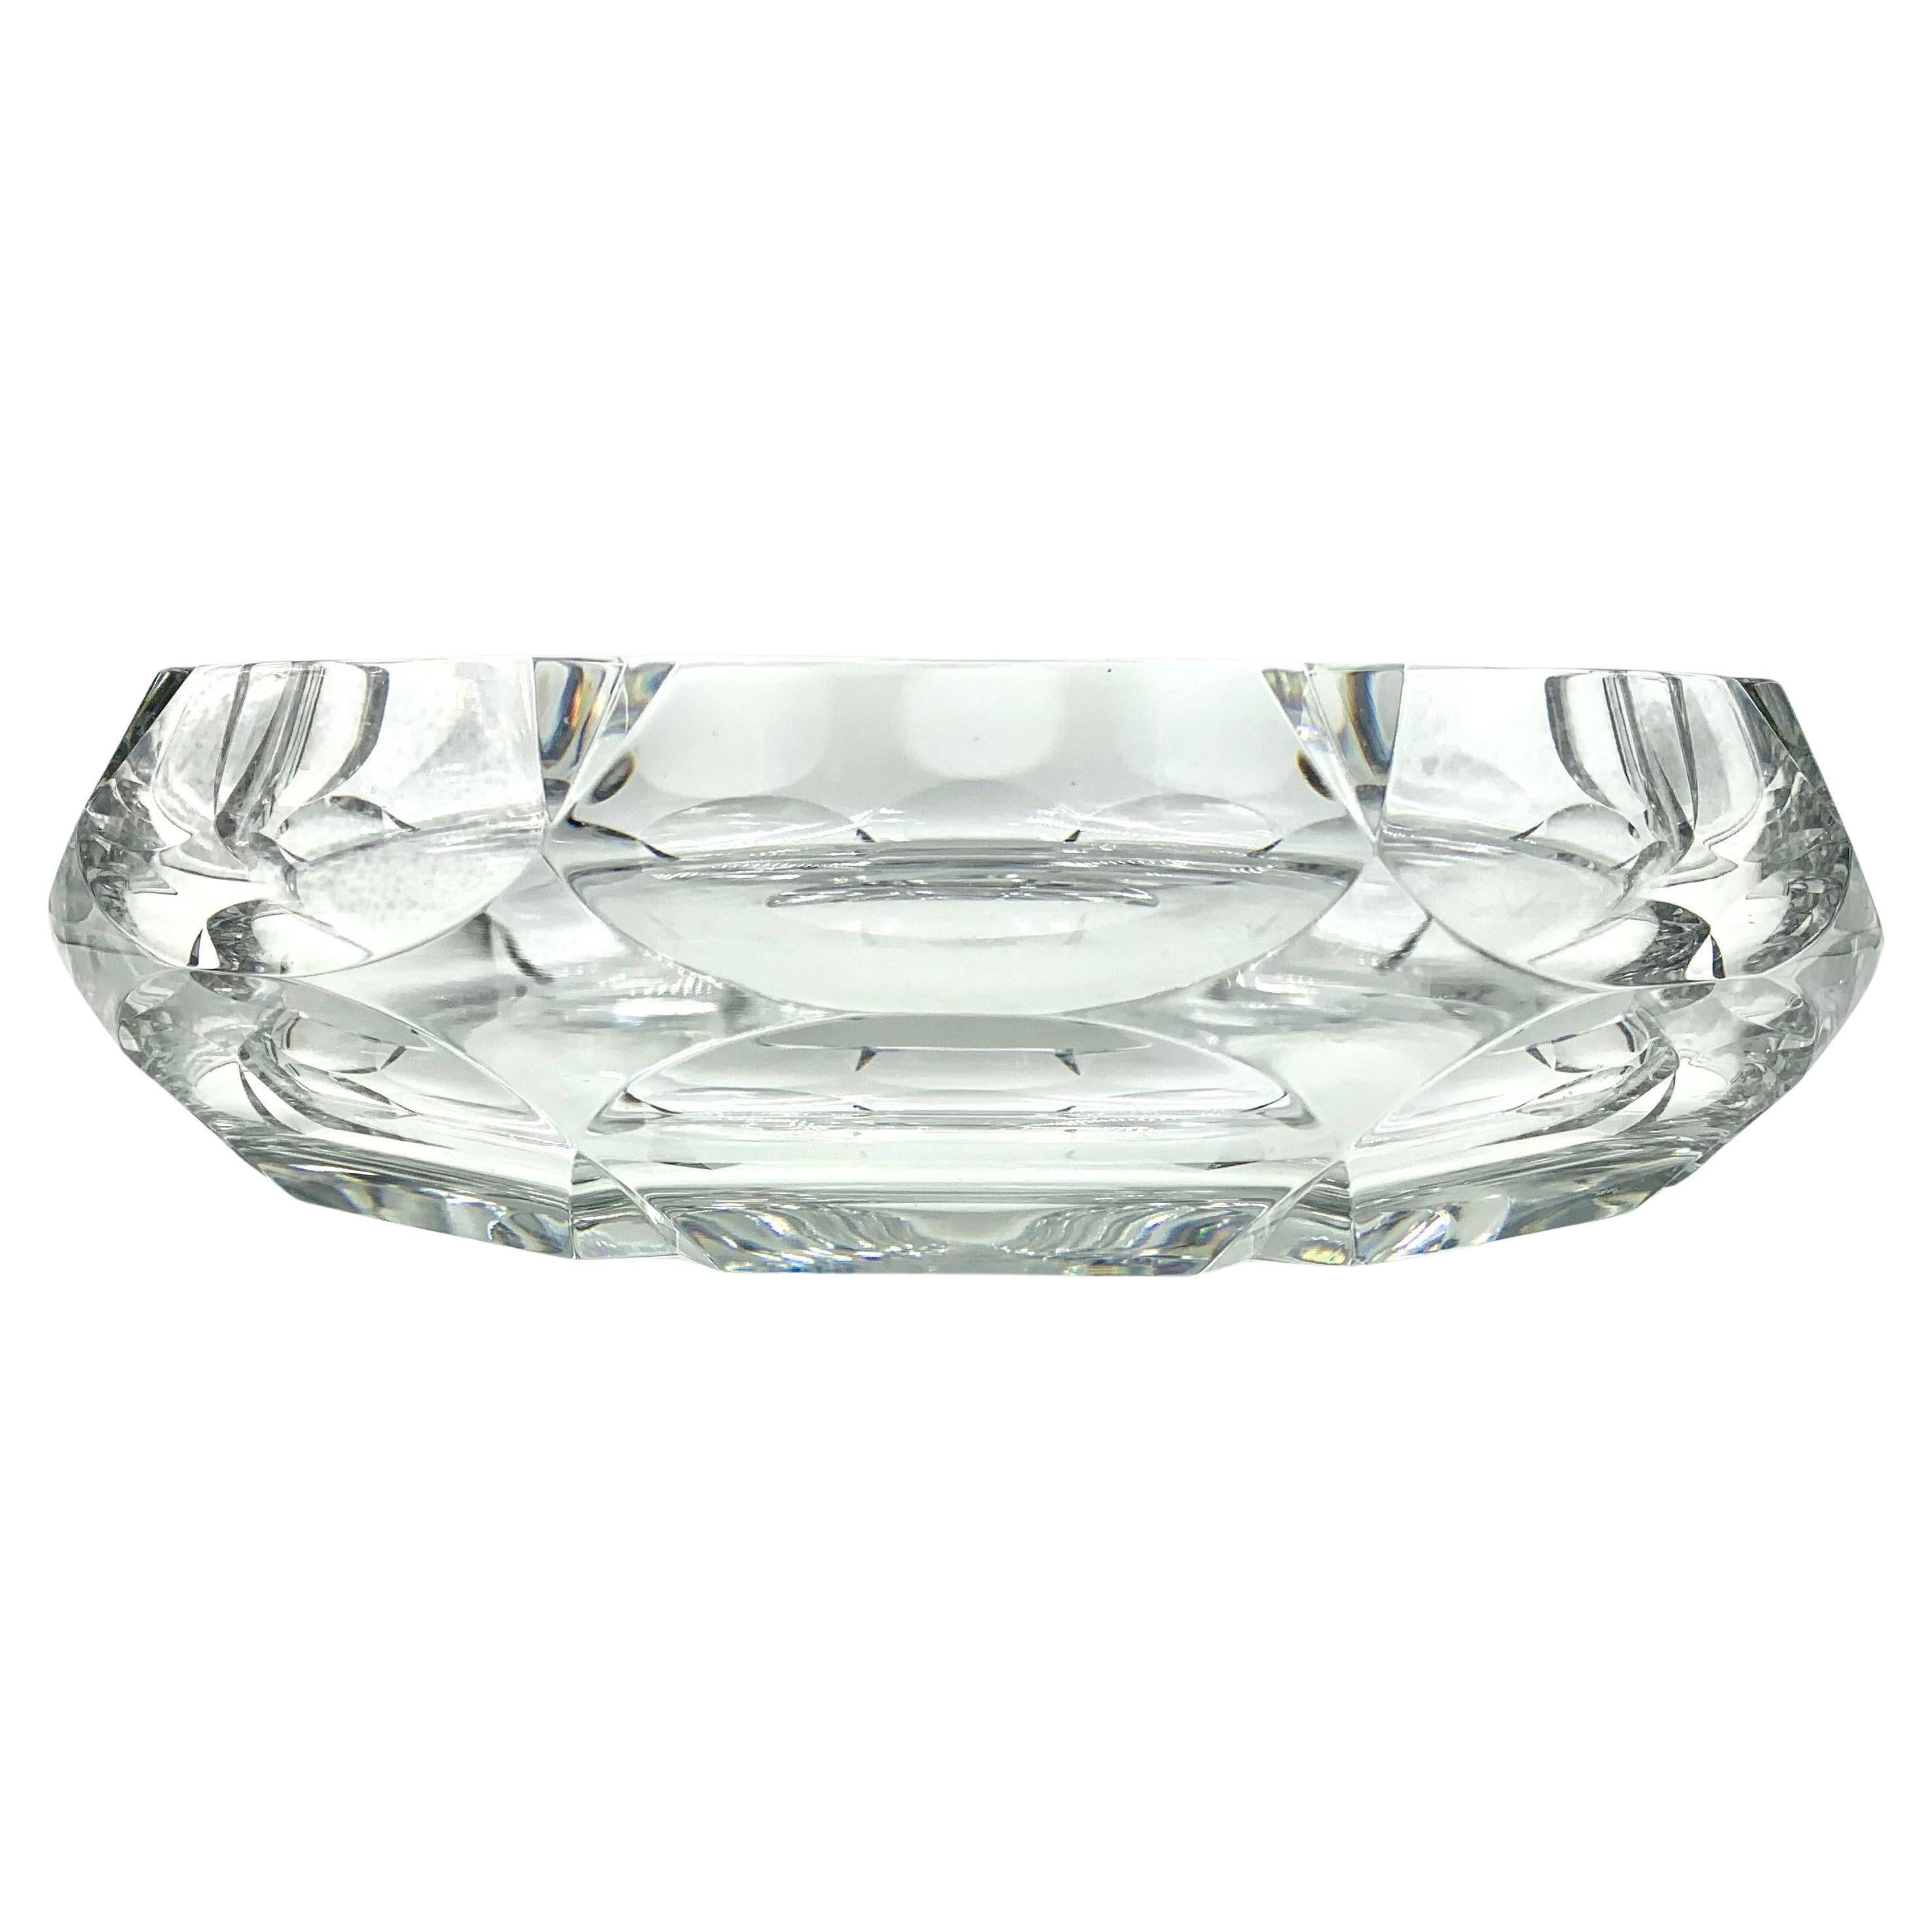 Massive Estate Baccarat Crystal Centerpiece, Early 20th Century